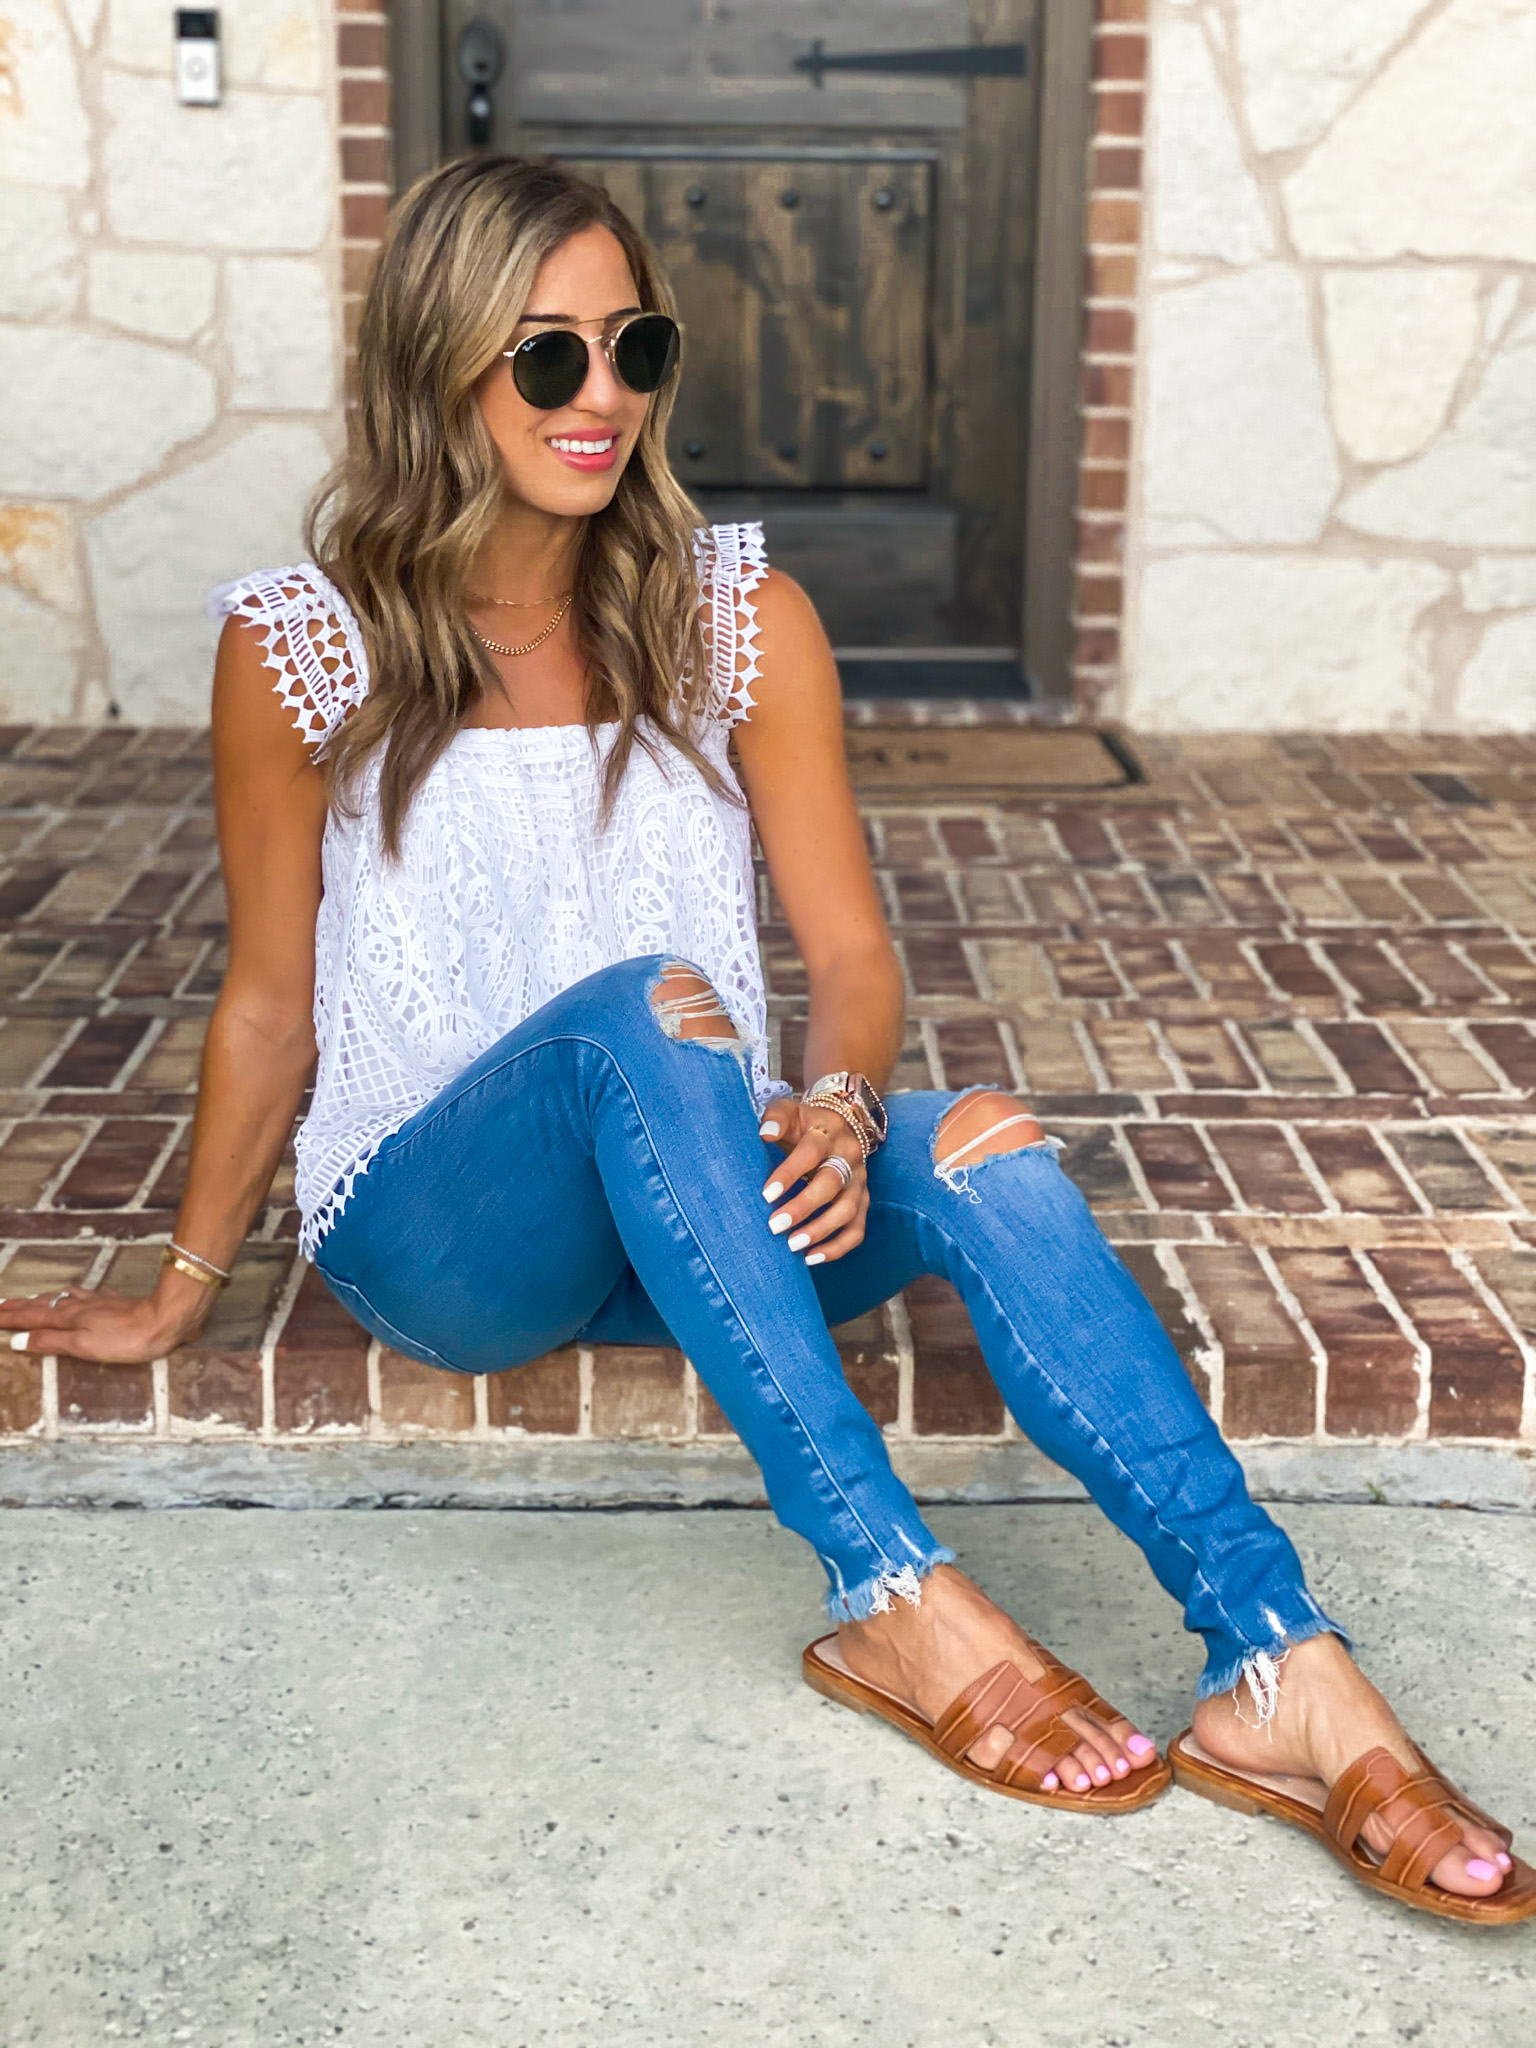 lifestyle and fashion blogger alexis belbel sharing how to style green shorts with a denim jacket and lace bodysuit from express and a white lace top with ripped skinny jeans for petites | adoubledose.com